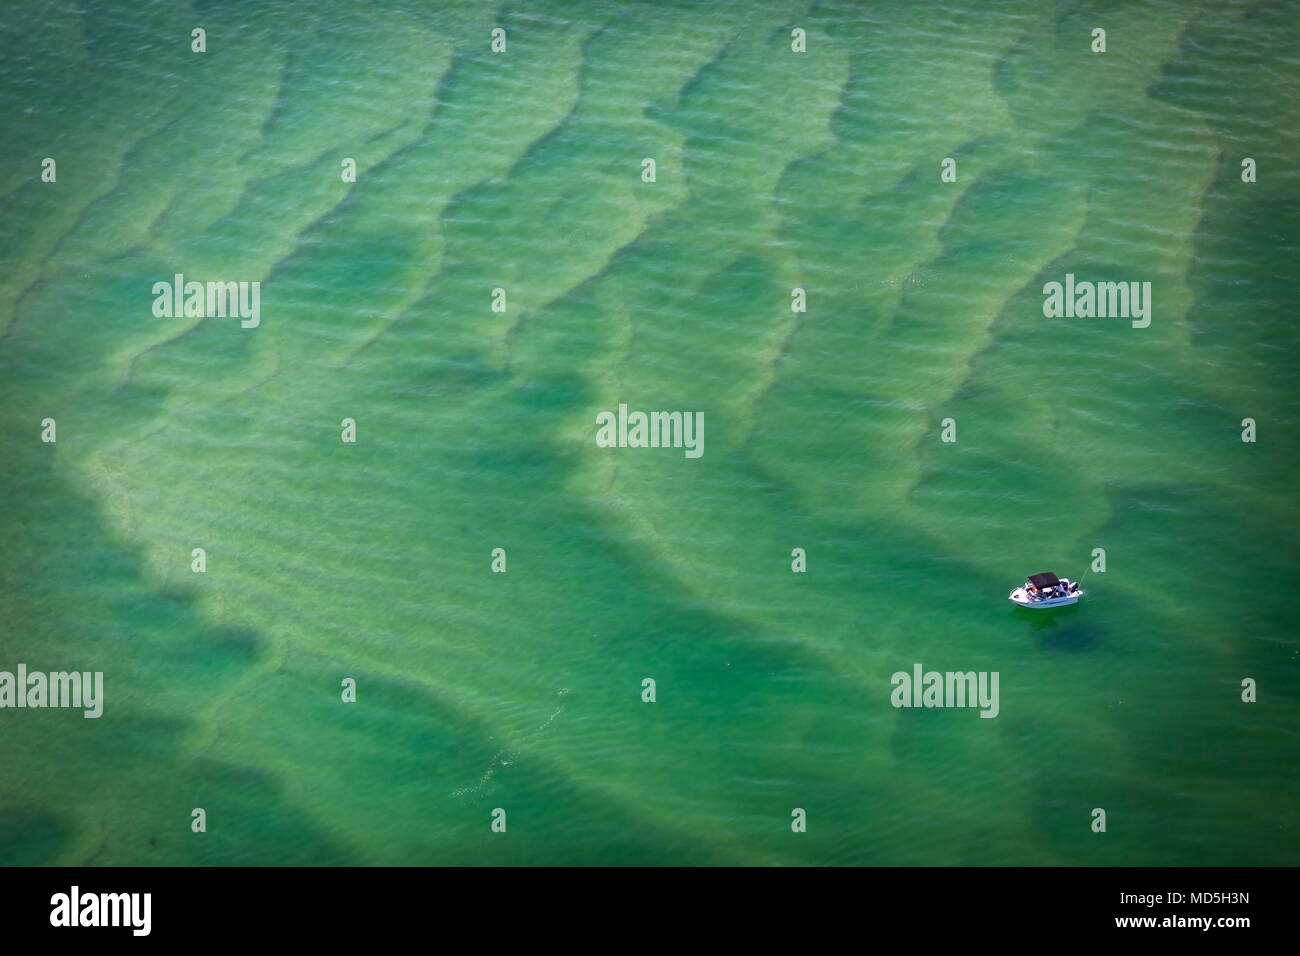 Abstract aerial photography of a fishing boat at Lake Macquarie, NSW, Australia Stock Photo